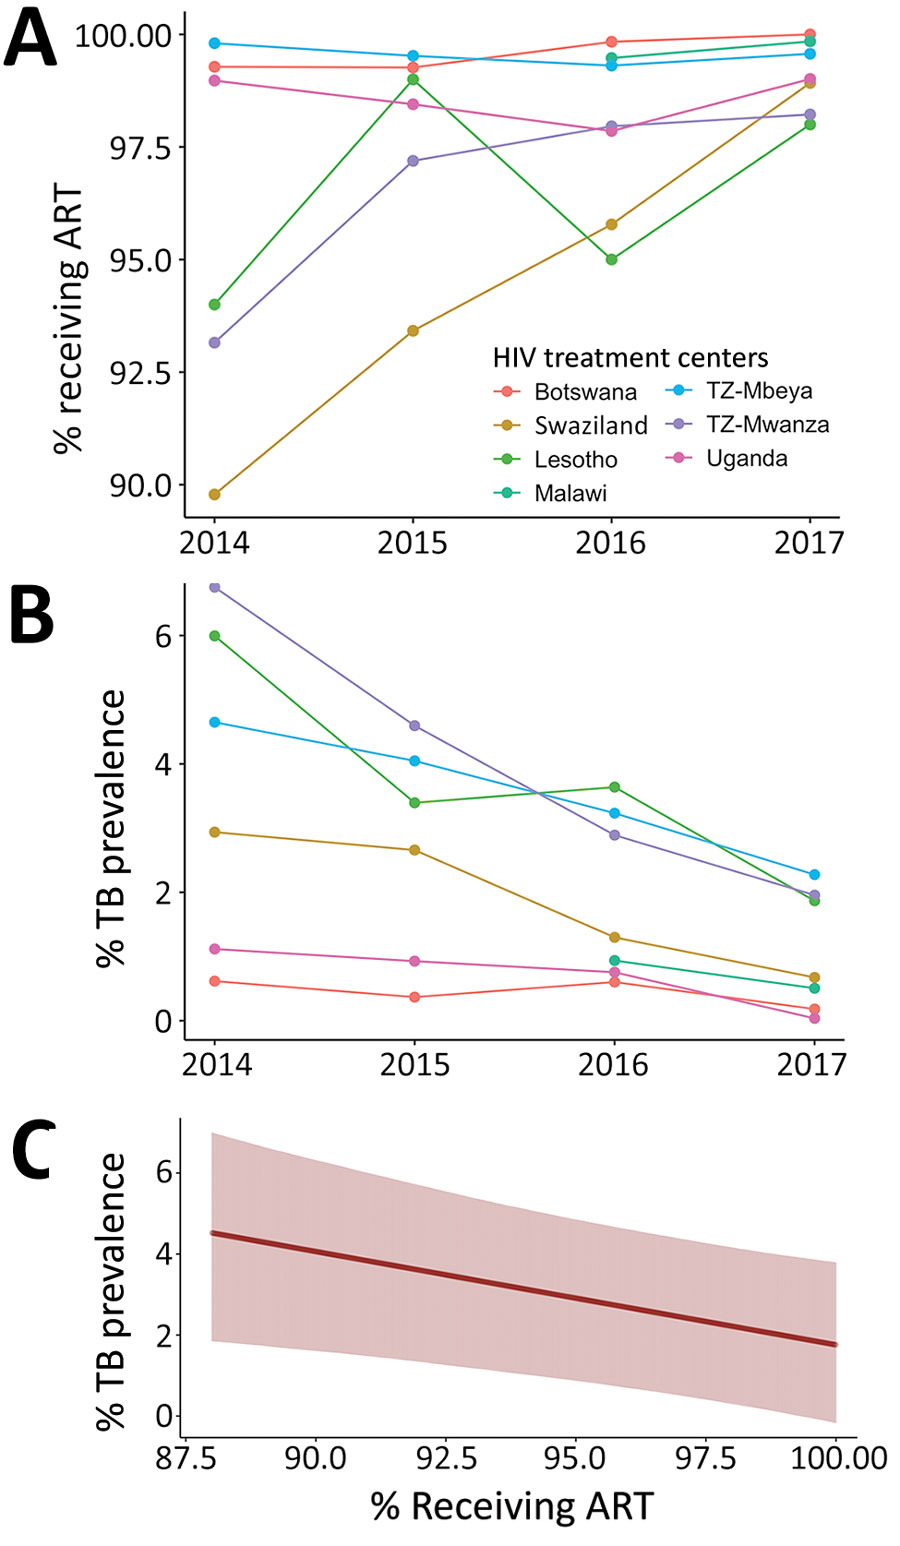 ART use and TB prevalence in HIV-infected children and adolescents, 2013–2017. A) Annual percentage of the cohort at each HIV treatment center receiving ART. B) Annual percentage of the cohort at each treatment center in whom TB was diagnosed. C) Declining TB prevalence with increase in ART uptake, averaged across all treatment centers in the study period. ART, antiretroviral therapy; TB, tuberculosis.